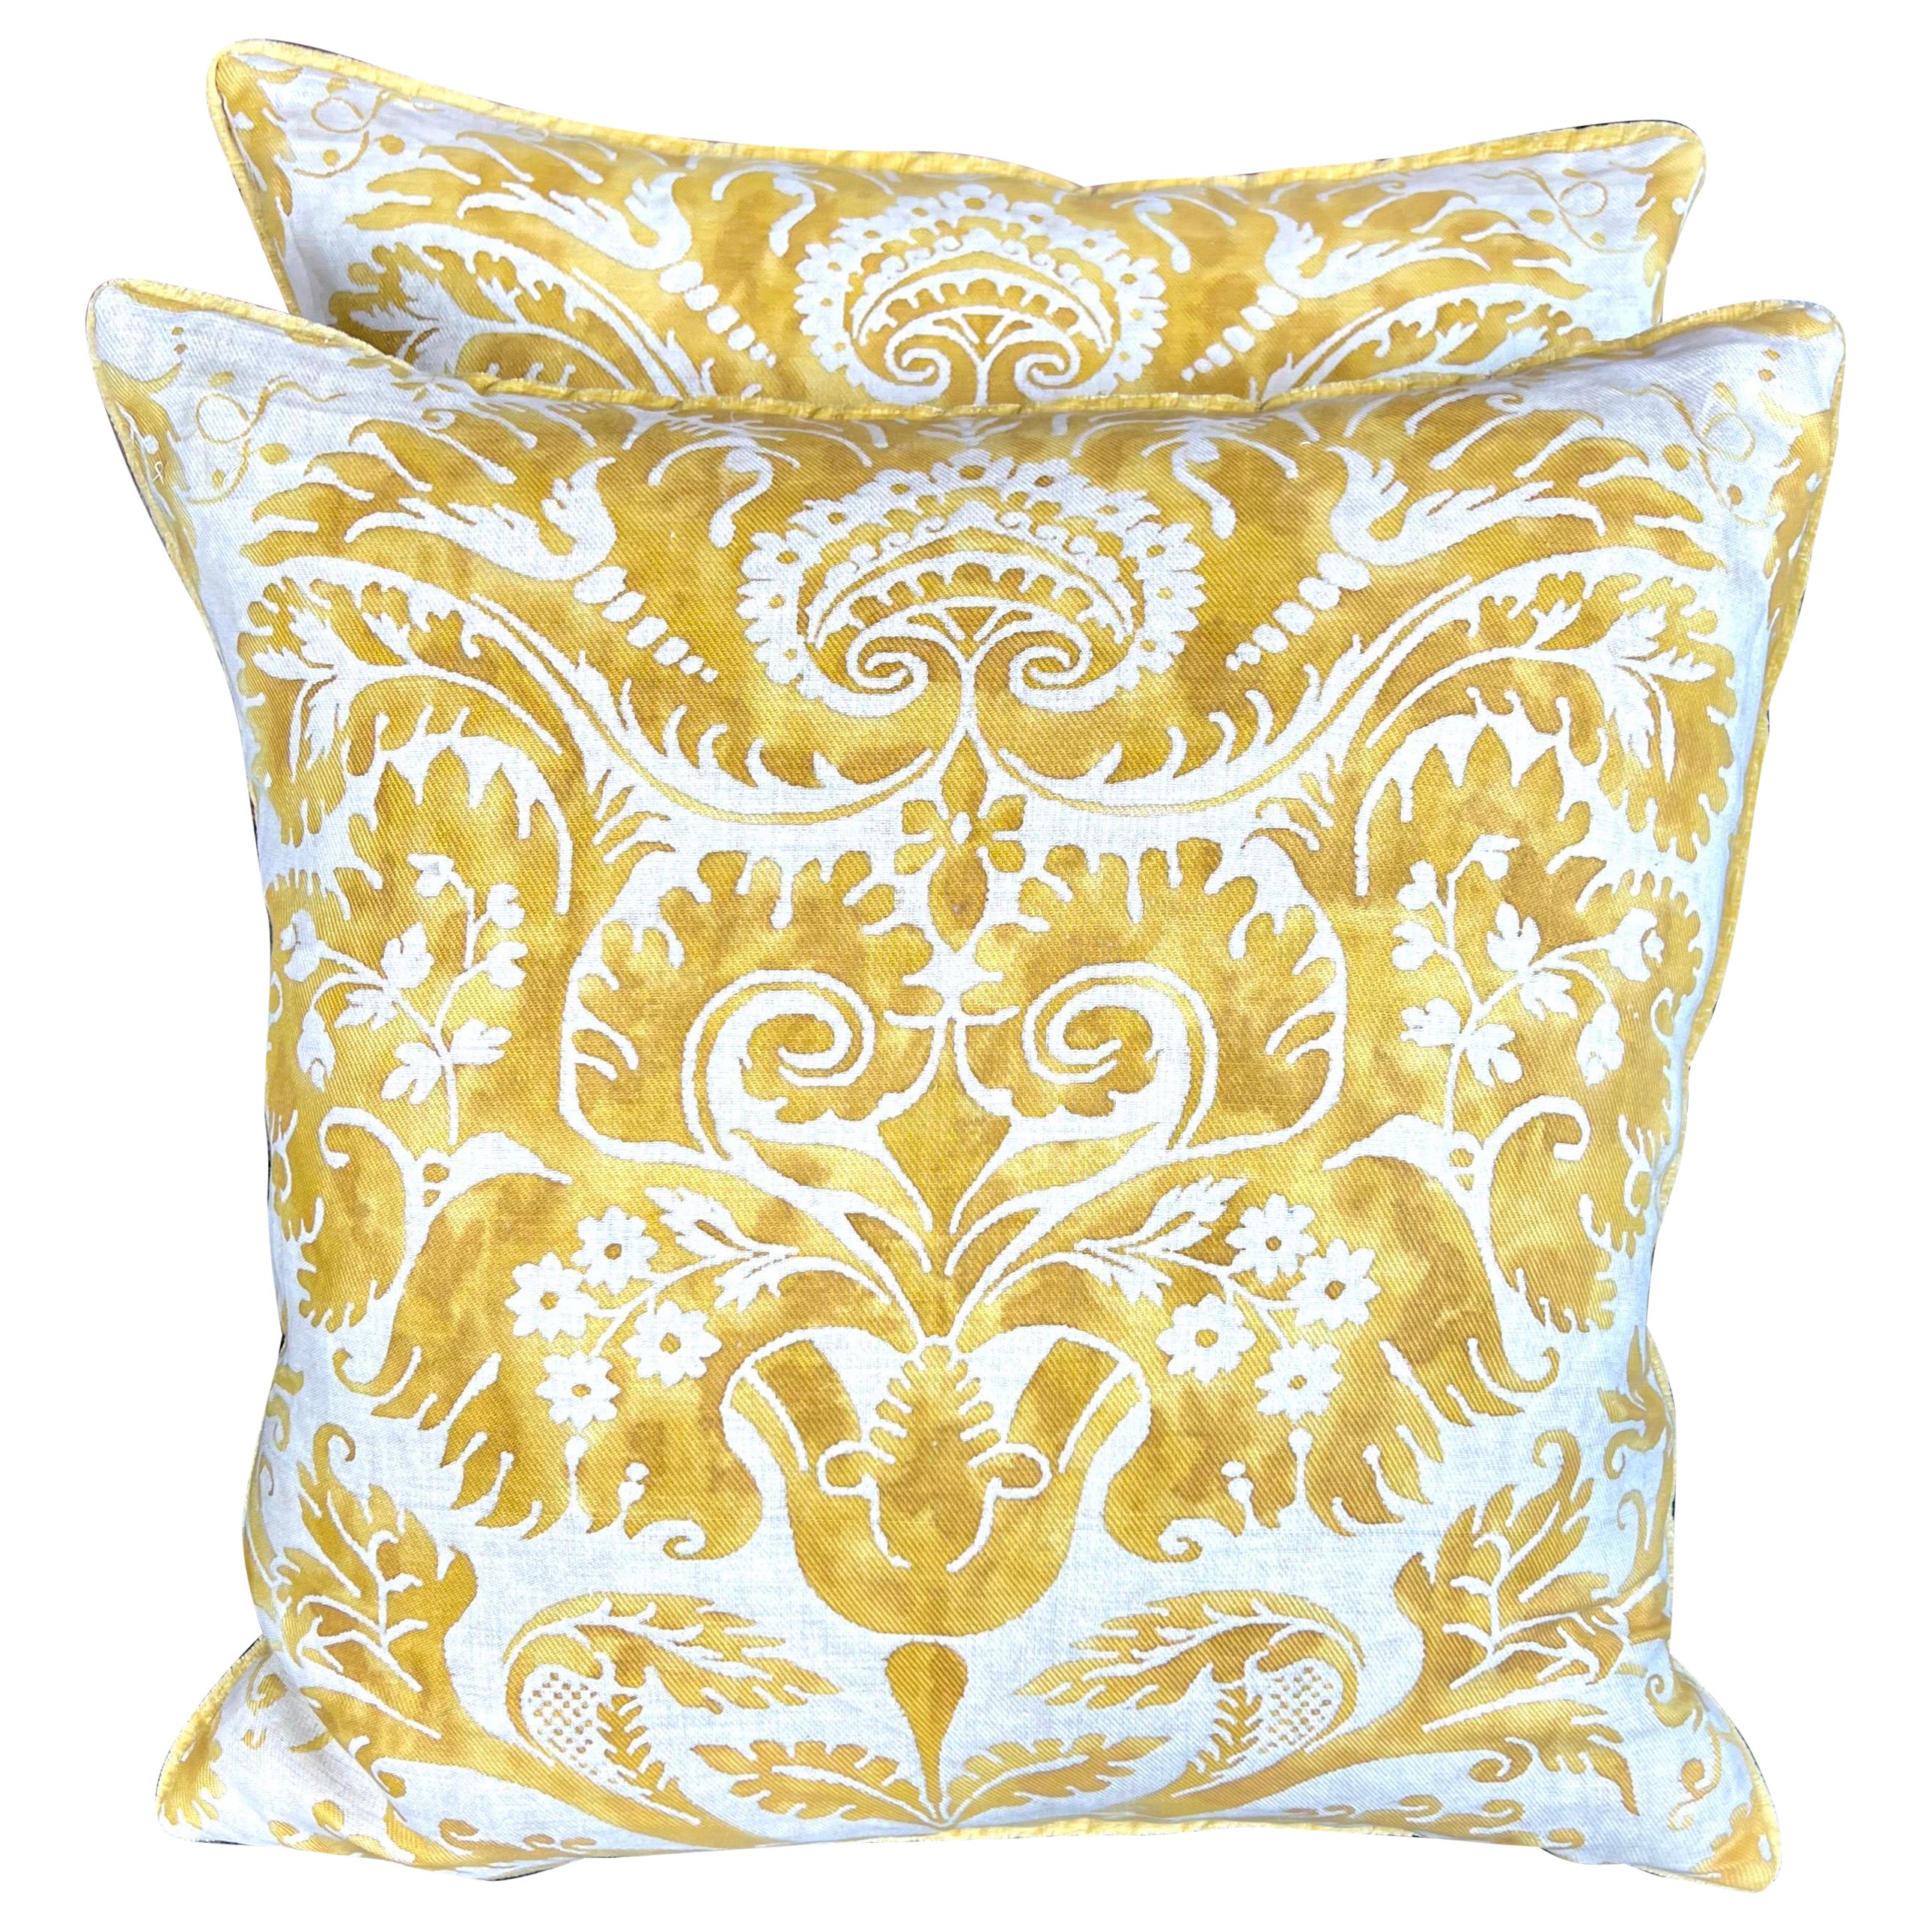 Pair of Yellow & White De Medici Patterned Fortuny Pillows